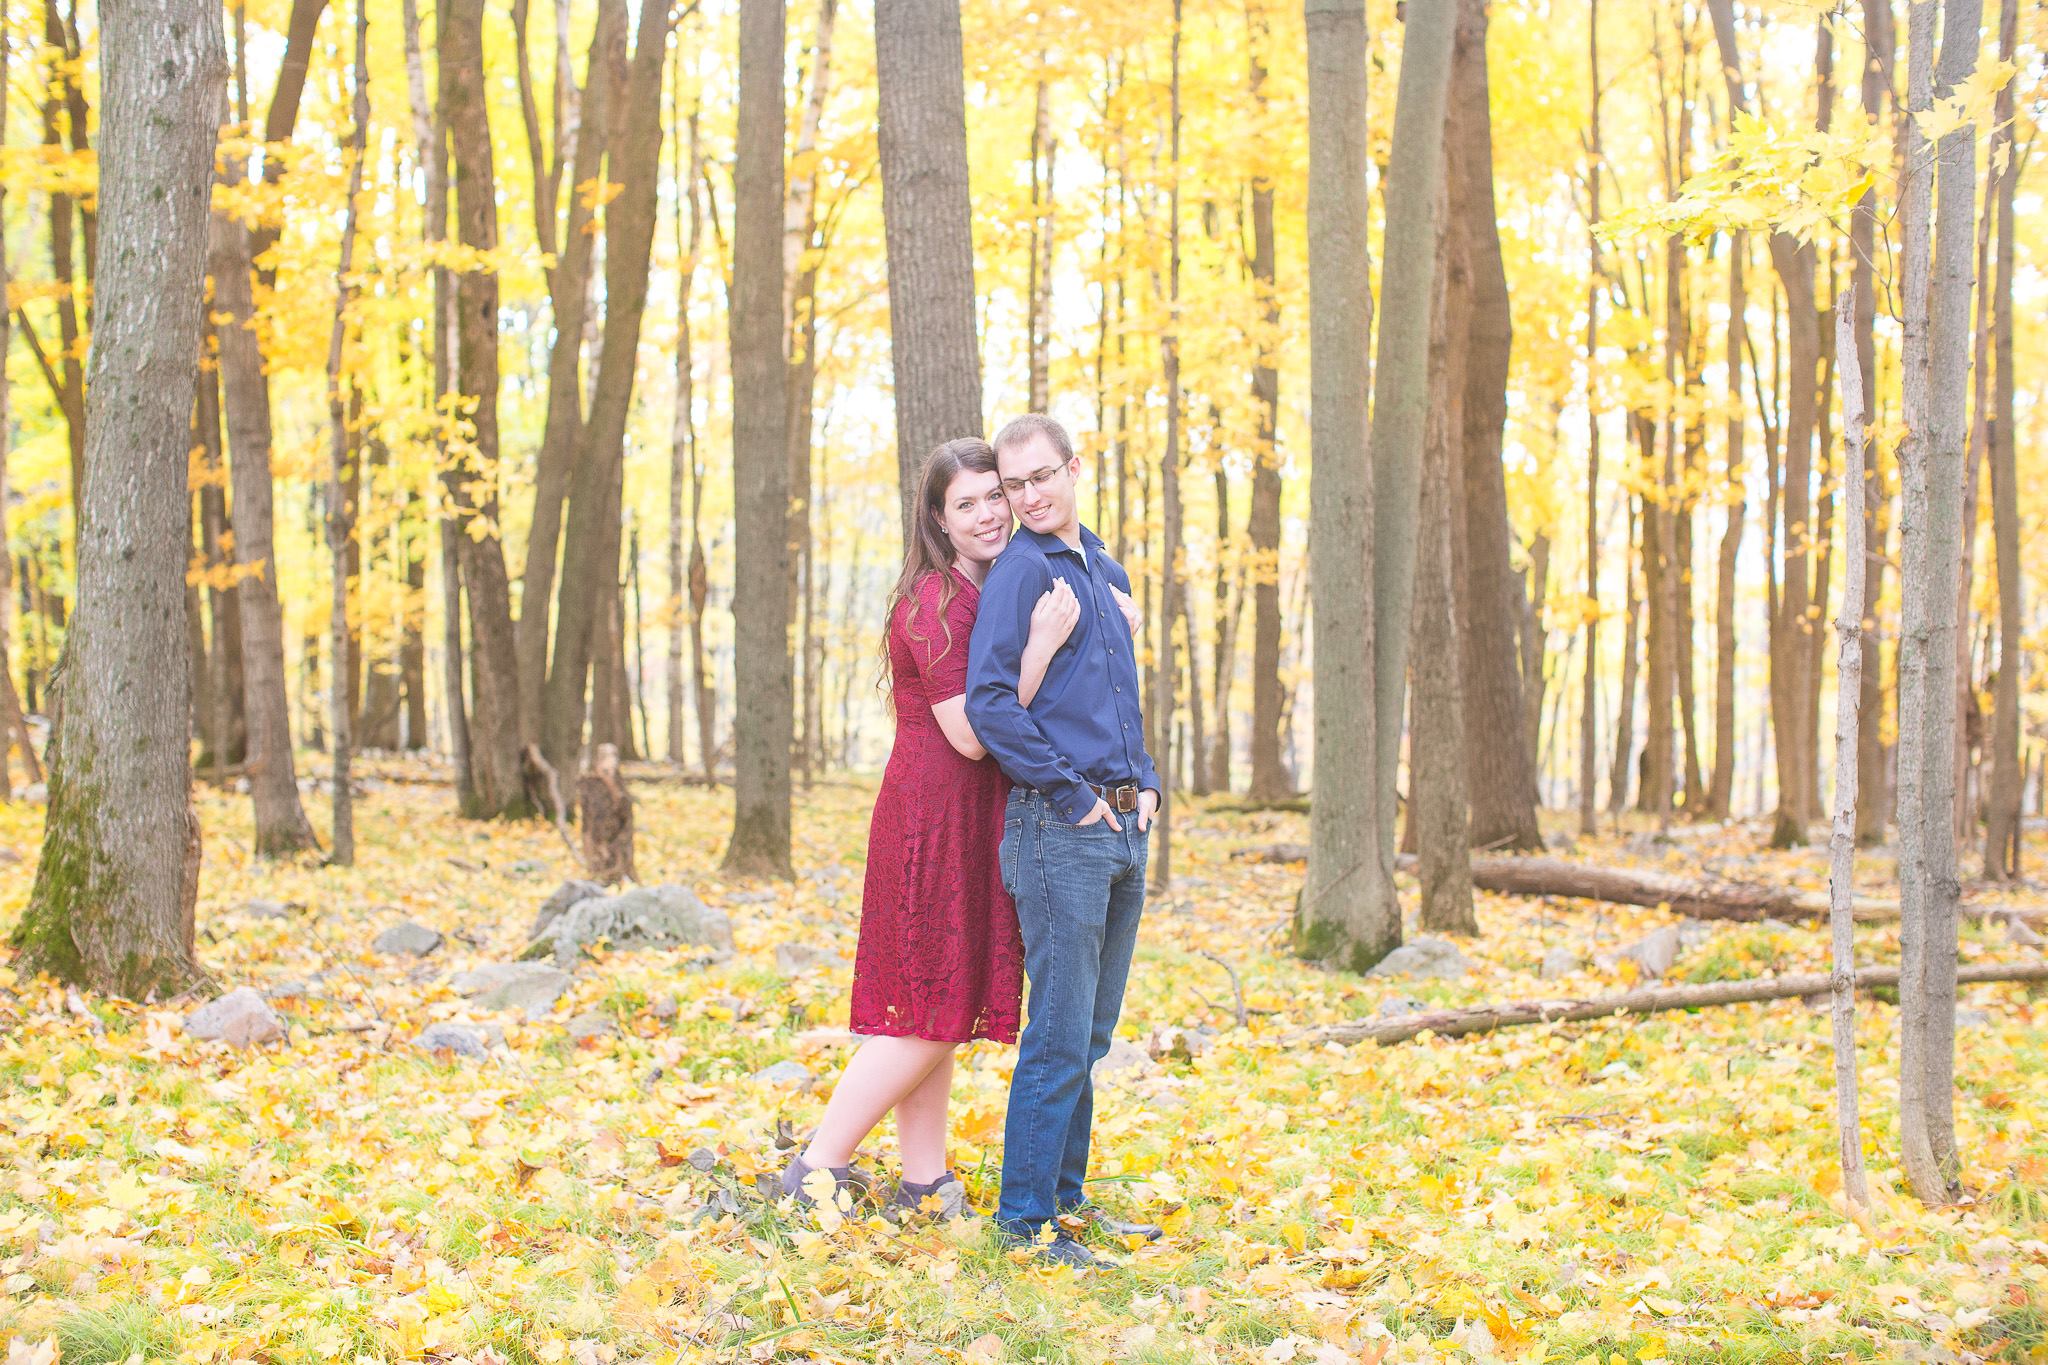 Couple in red and blue surrounded by yellow fall leaves